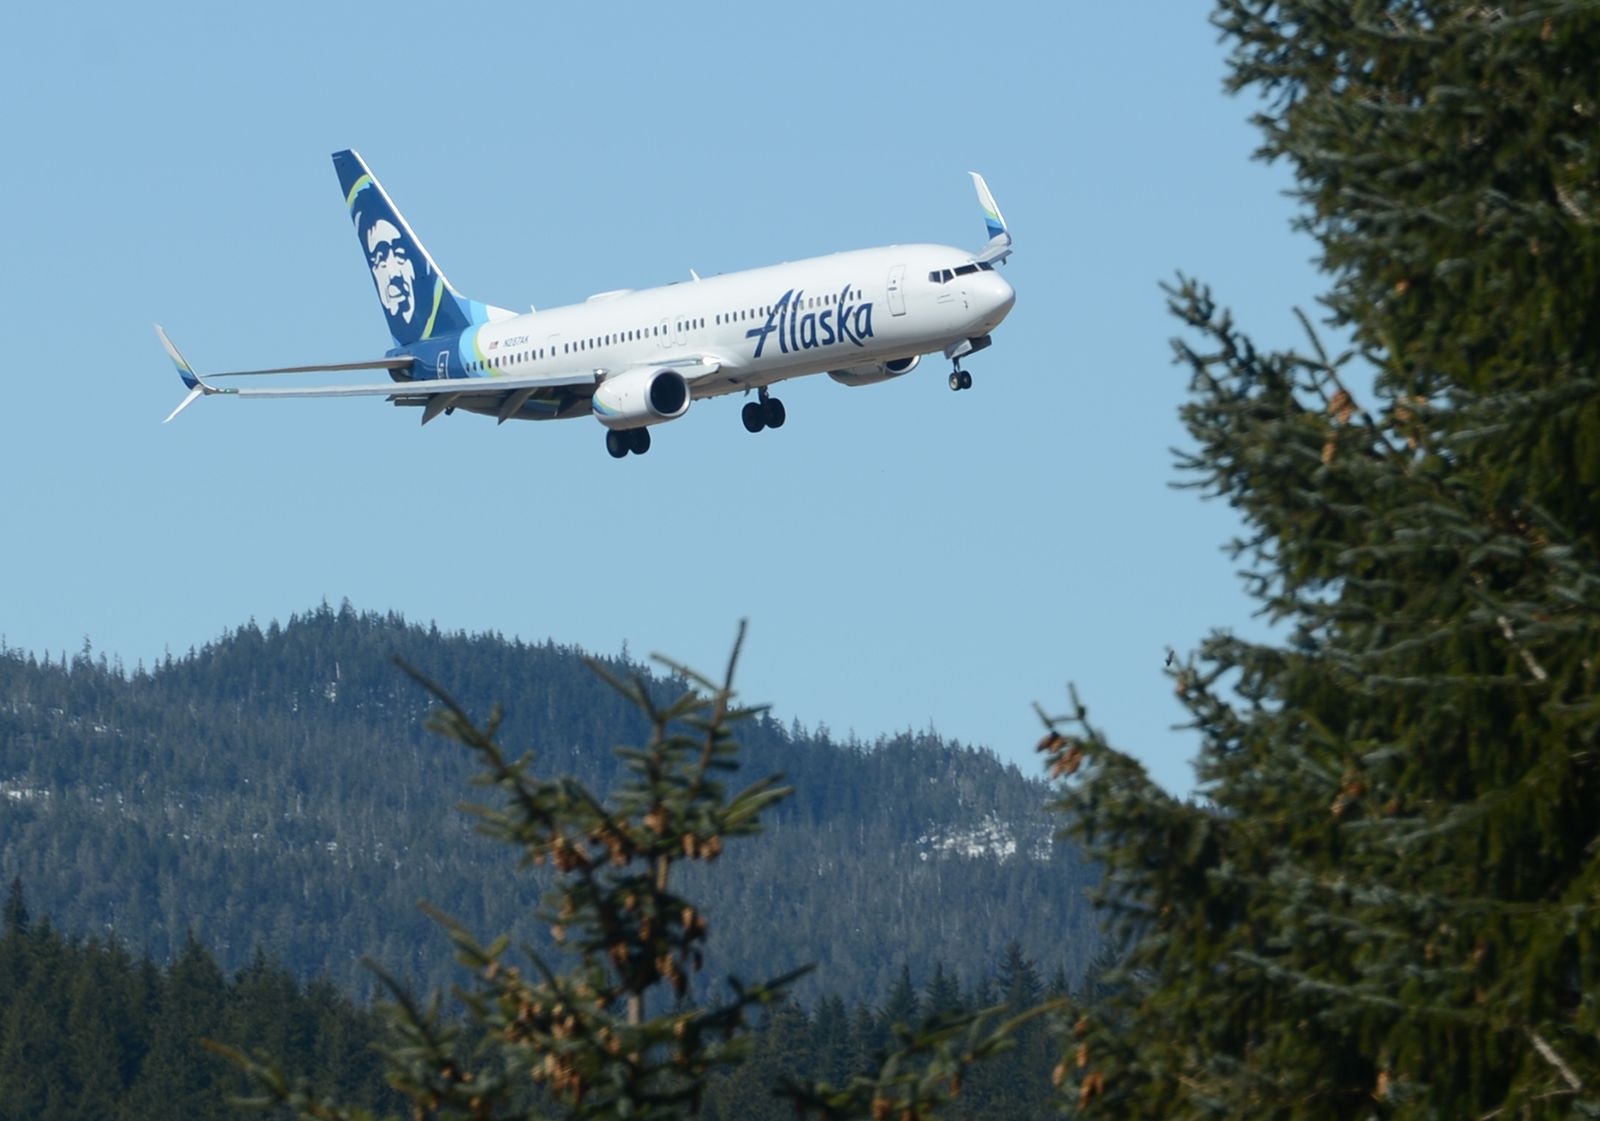 [HOT UNPUBLISHED SALE] Alaska Air $500 First Class Round Trip From Atlanta to Juneau